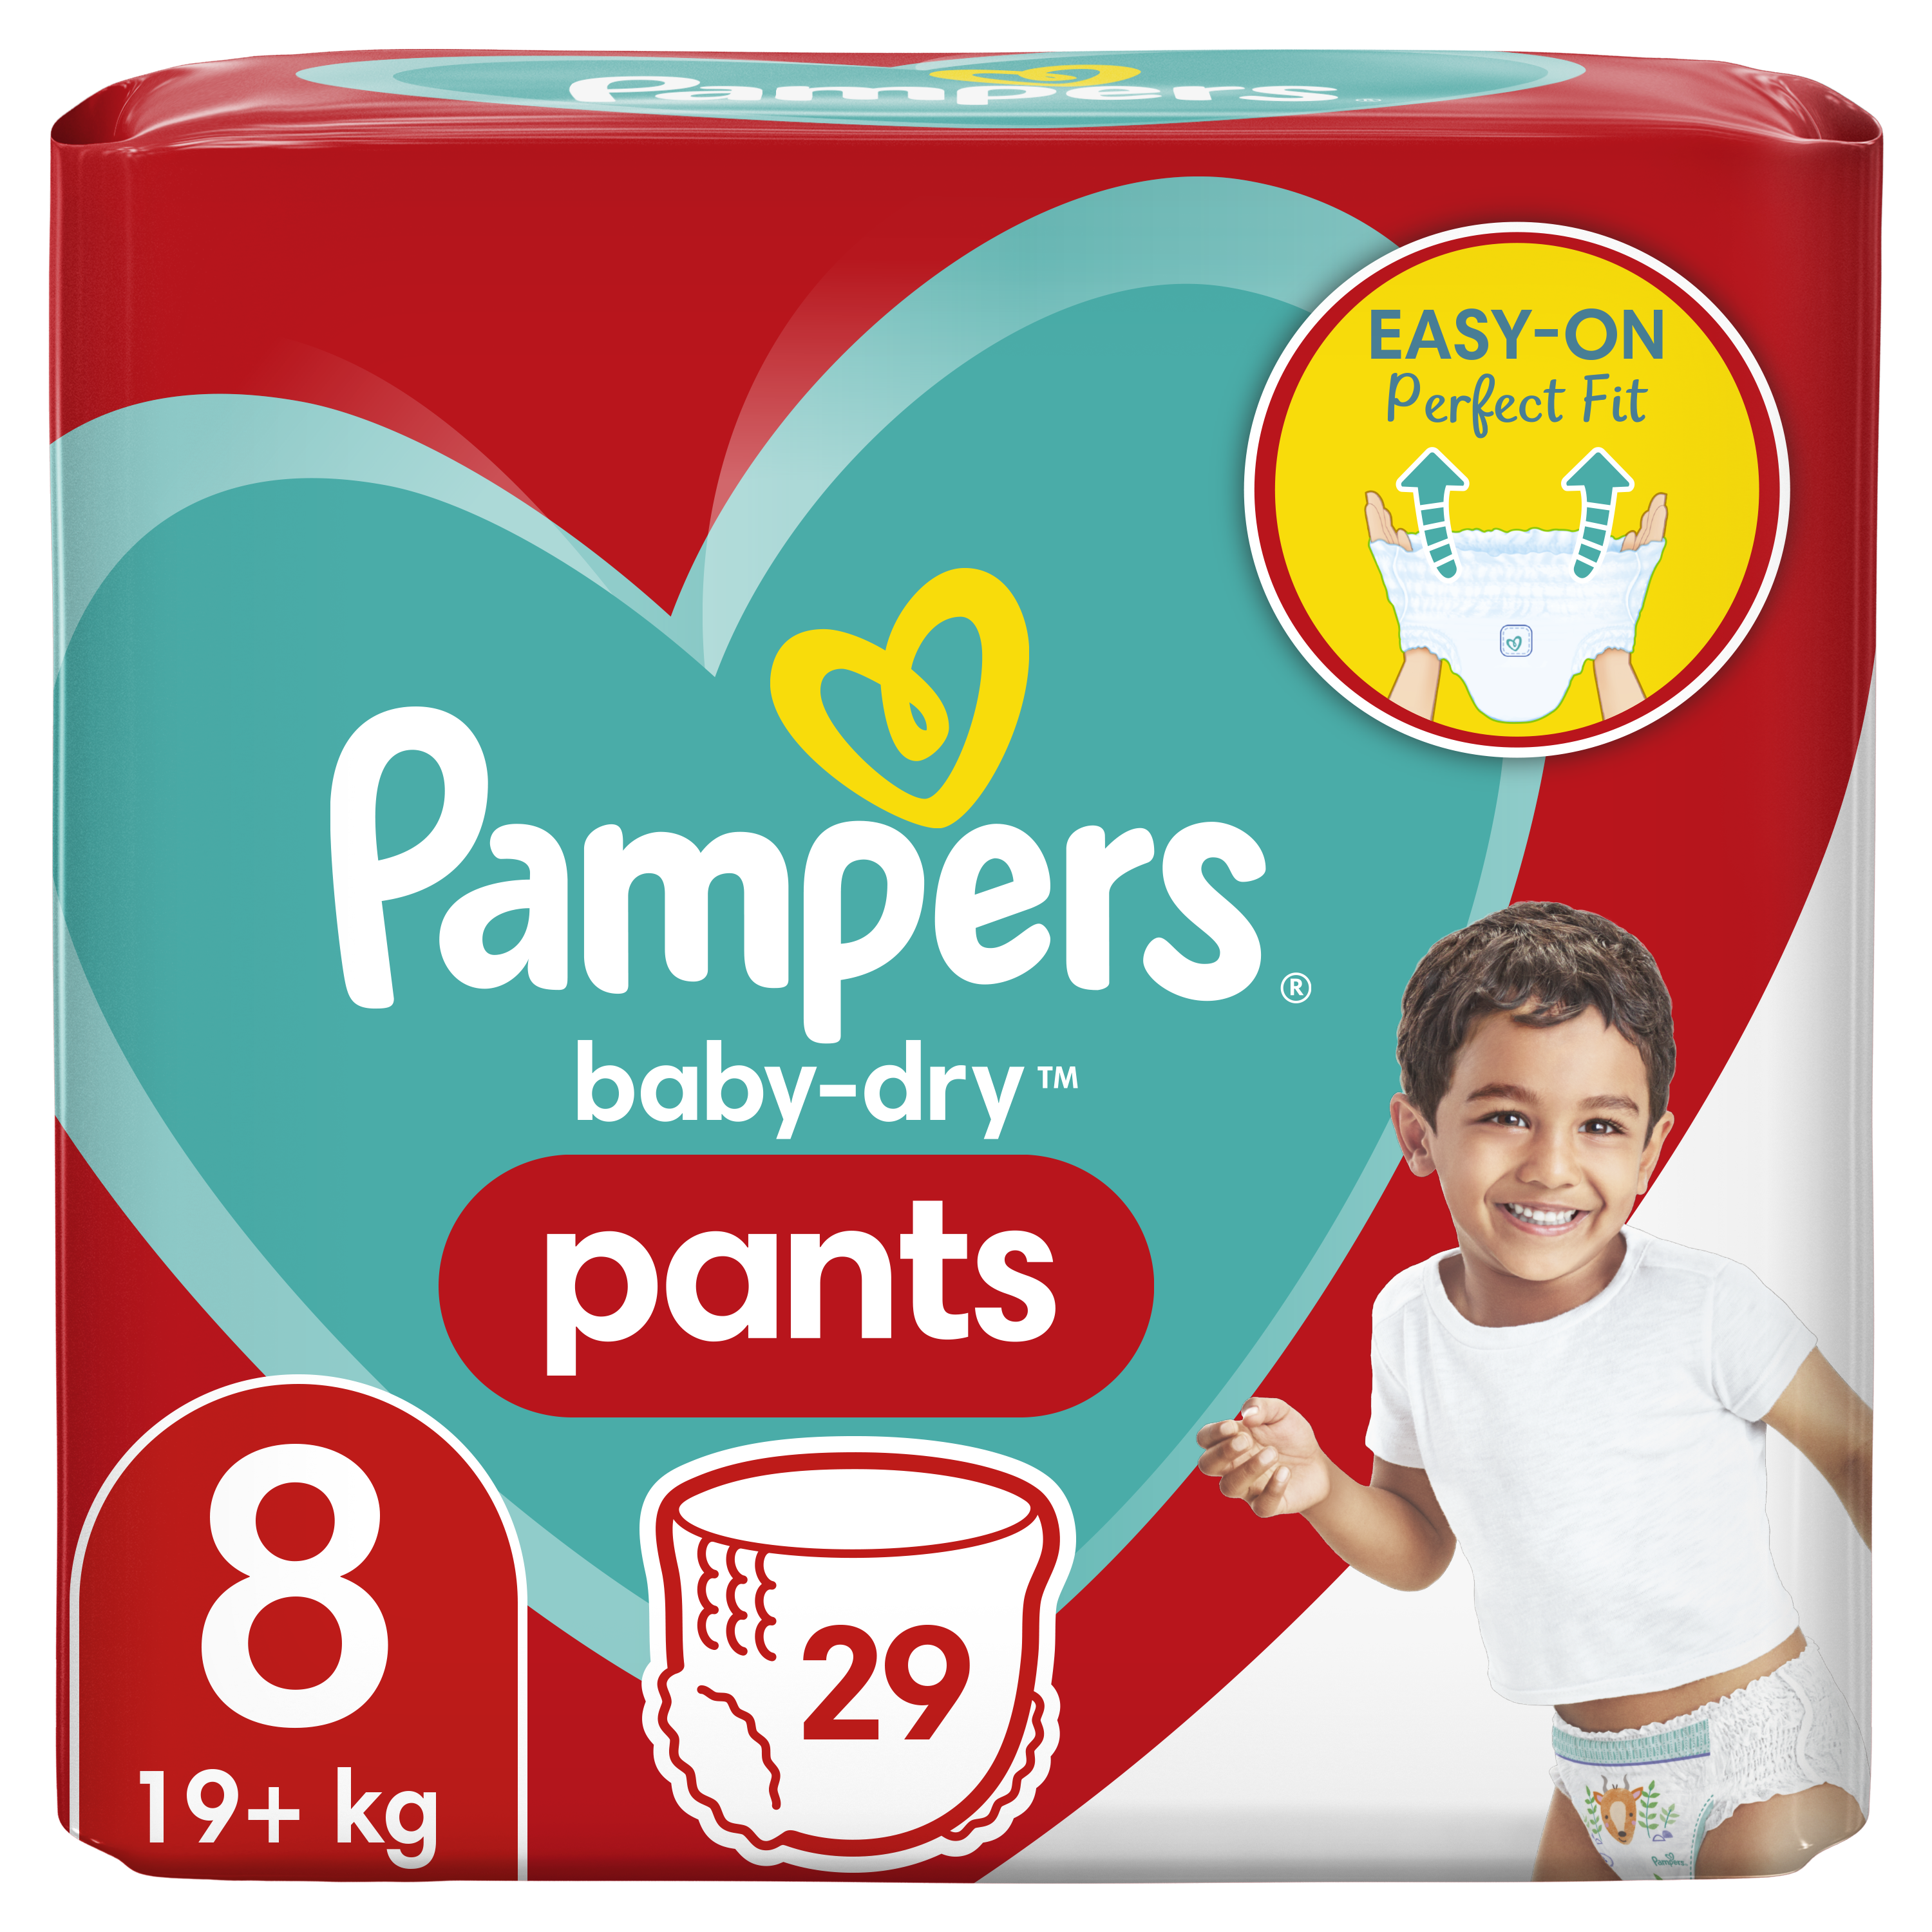 PAMPERS Baby-dry pants couches culottes taille 8 (+19kg) 29